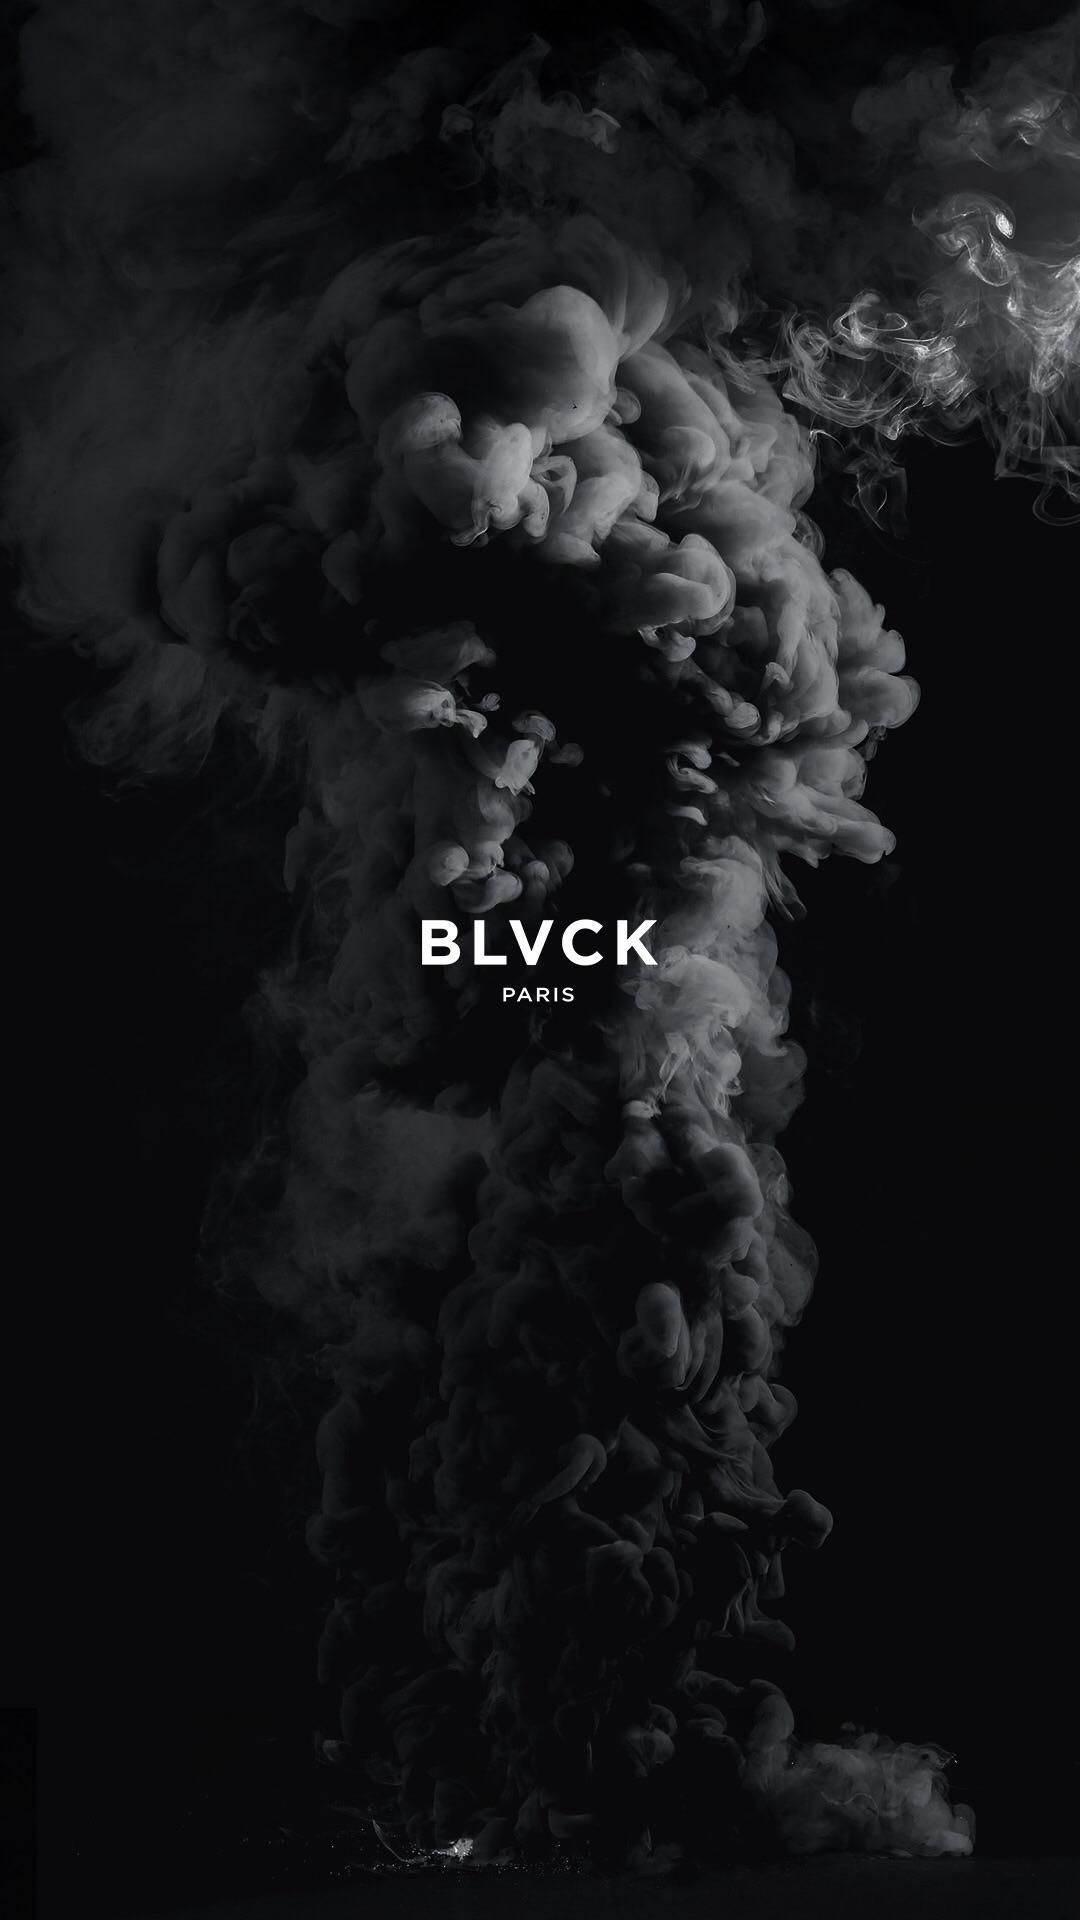 Black wallpaper with smoke and the word 